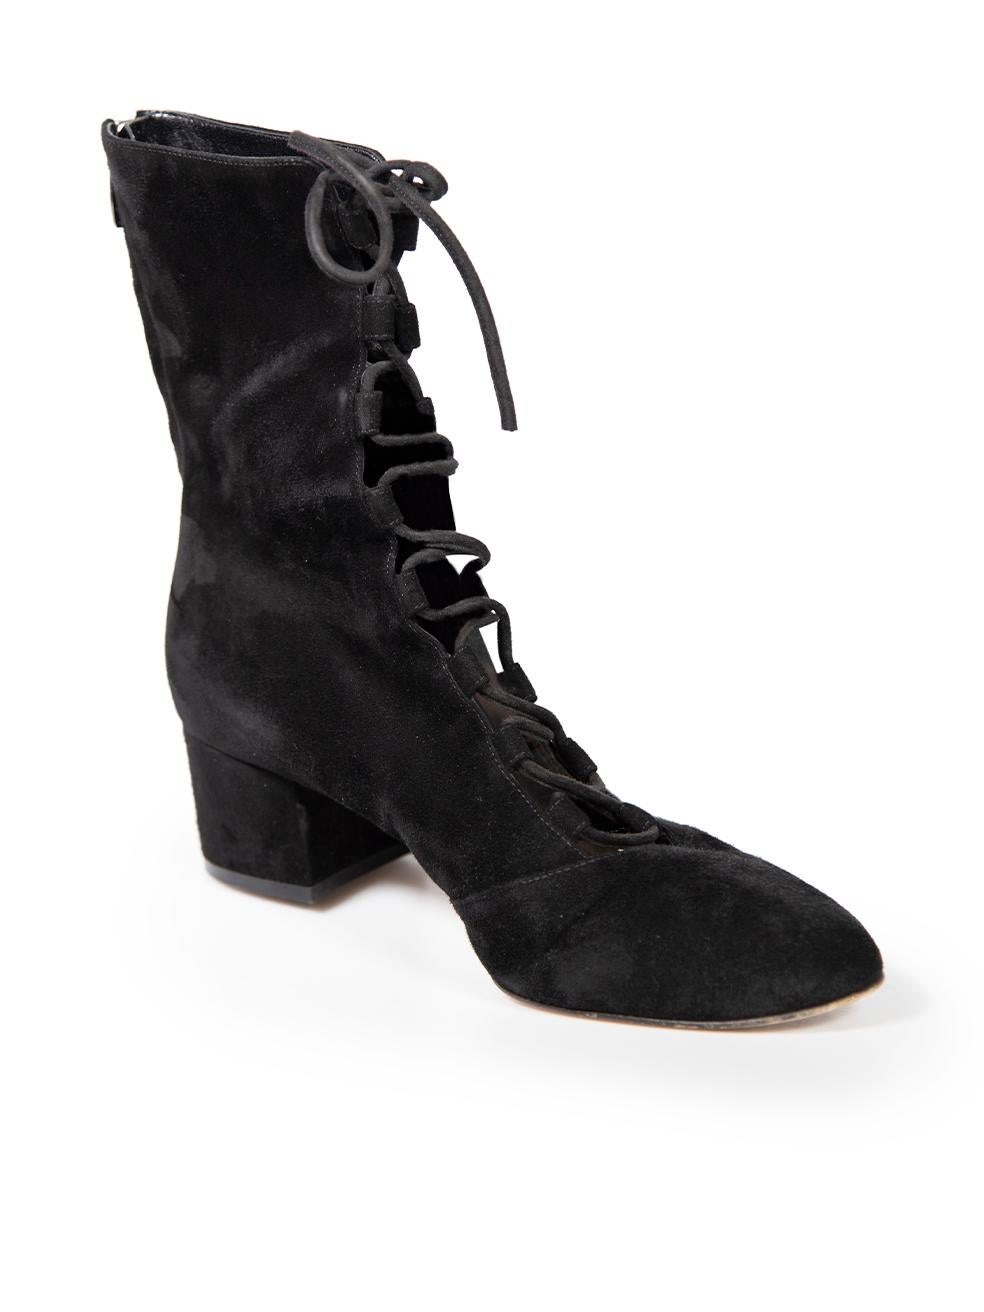 CONDITION is Very good. Minimal wear to boots is evident. Minimal wear to both boot heels with small abrasions to the suede on this used Gianvito Rossi designer resale item.
 
Details
Black
Suede
Boots
Mid calf
Mid heel
Round toe
Lace up